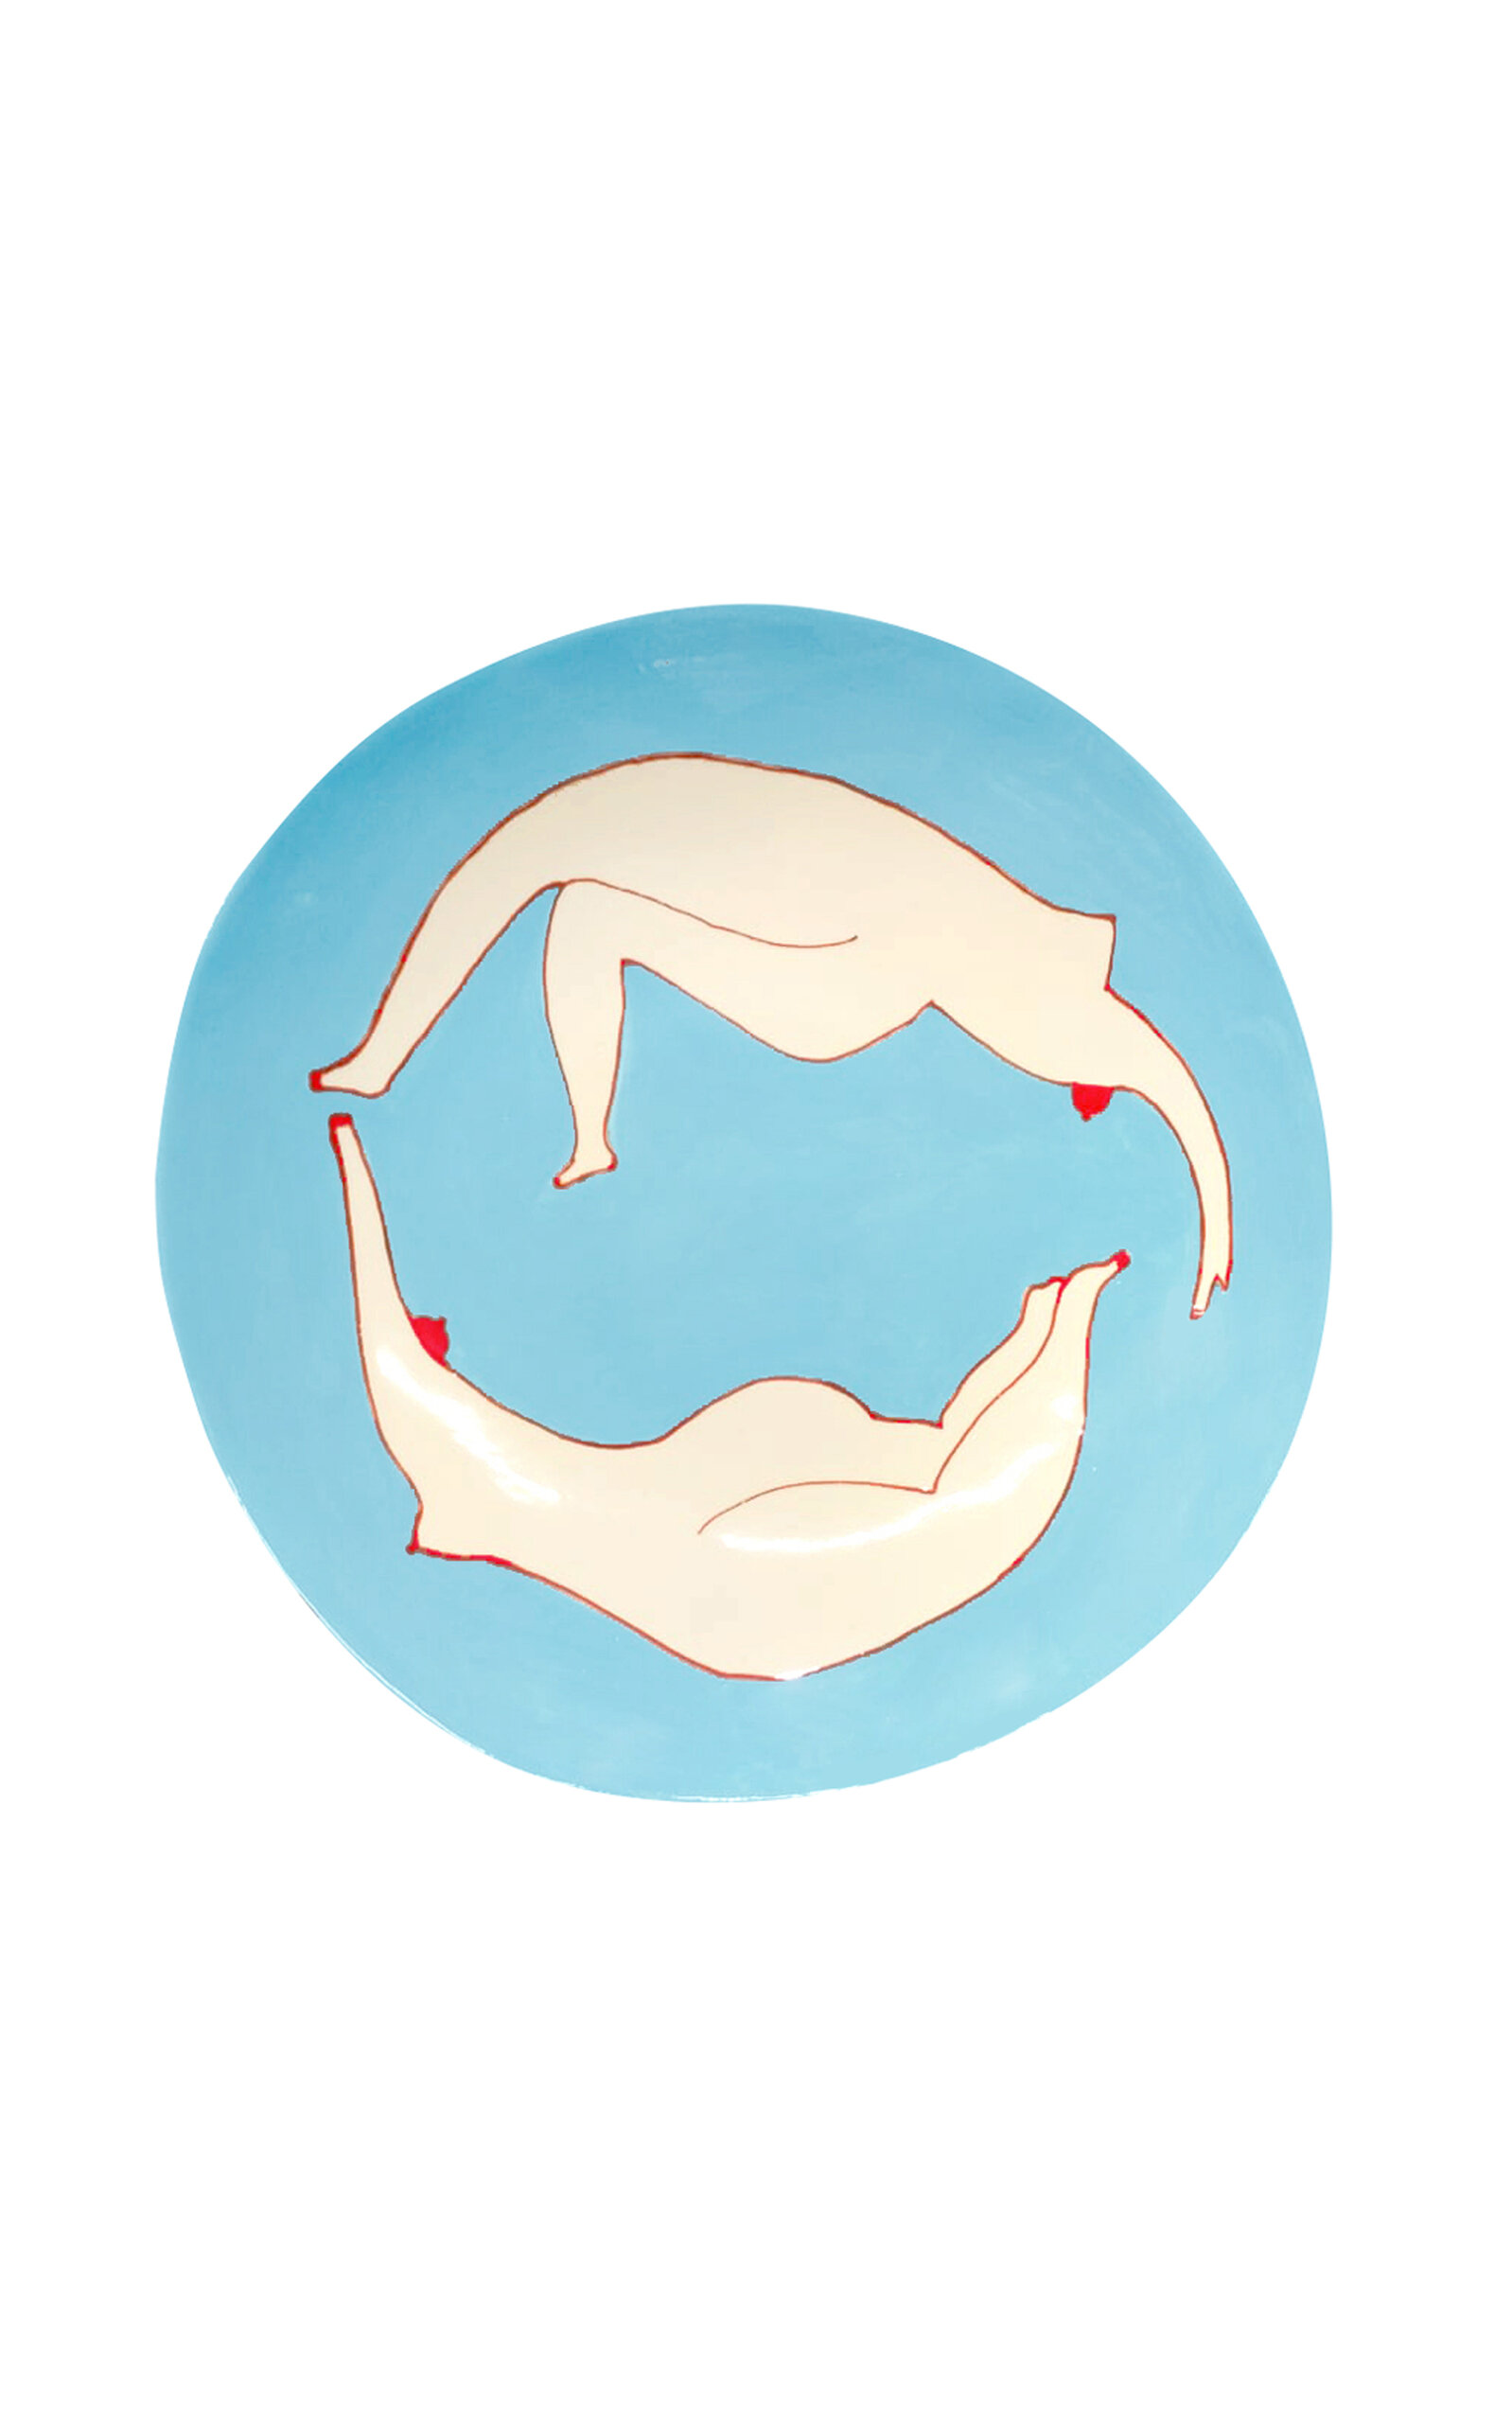 Laetitia Rouget Swimmers Turquoise Fruit Platter In Blue